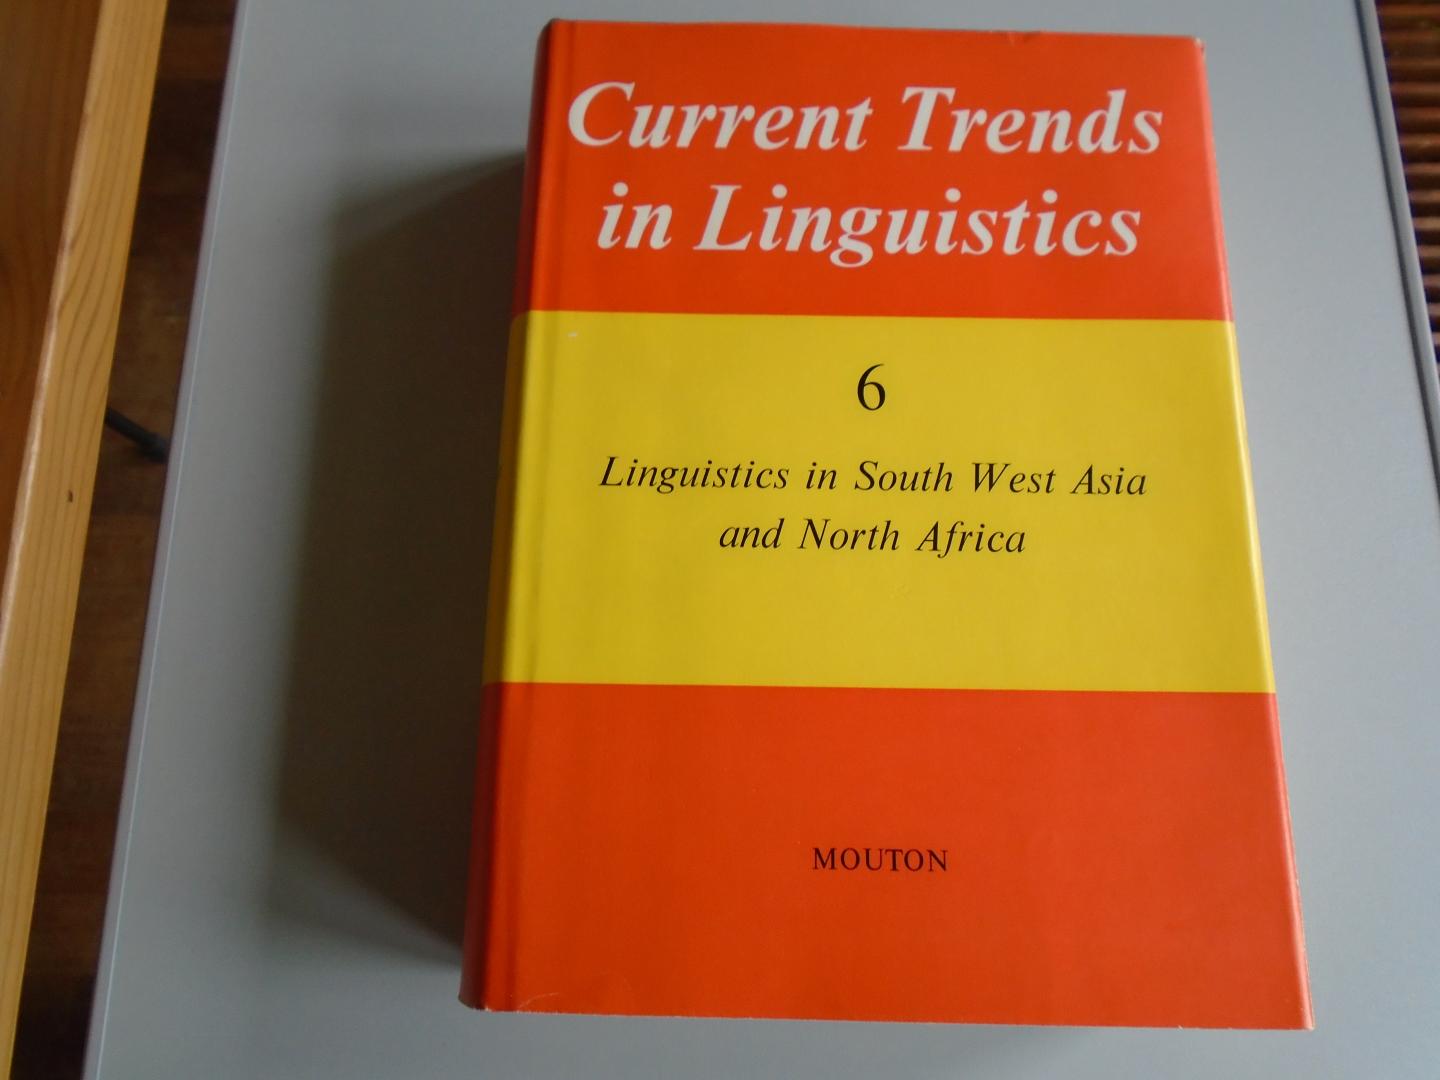 Sebeok, Thomas A. (ed.) - Current Trends in Linguistics, Volume 6: Linguistics in South West Asia and North Africa